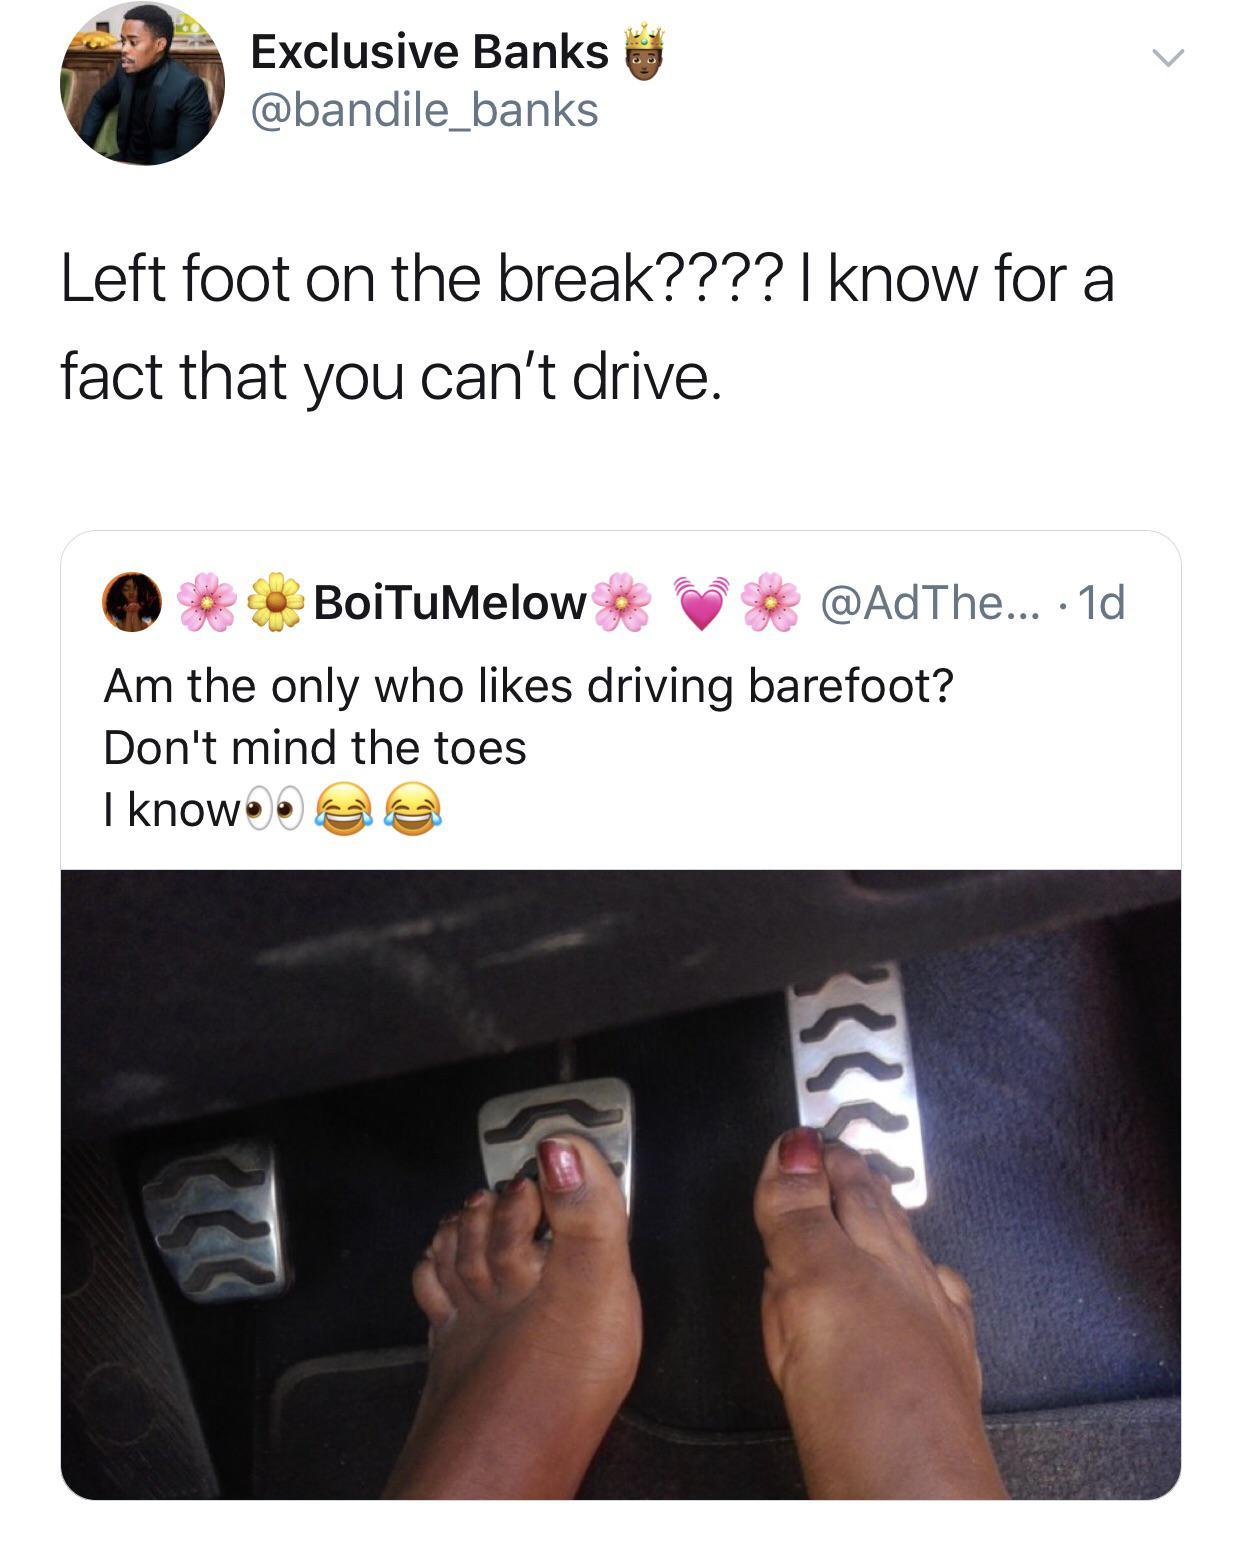 Driving - Exclusive Banks Left foot on the break???? I know for a fact that you can't drive. BoiTuMelow ... 1d Am the only who driving barefoot? Don't mind the toes I knowooo